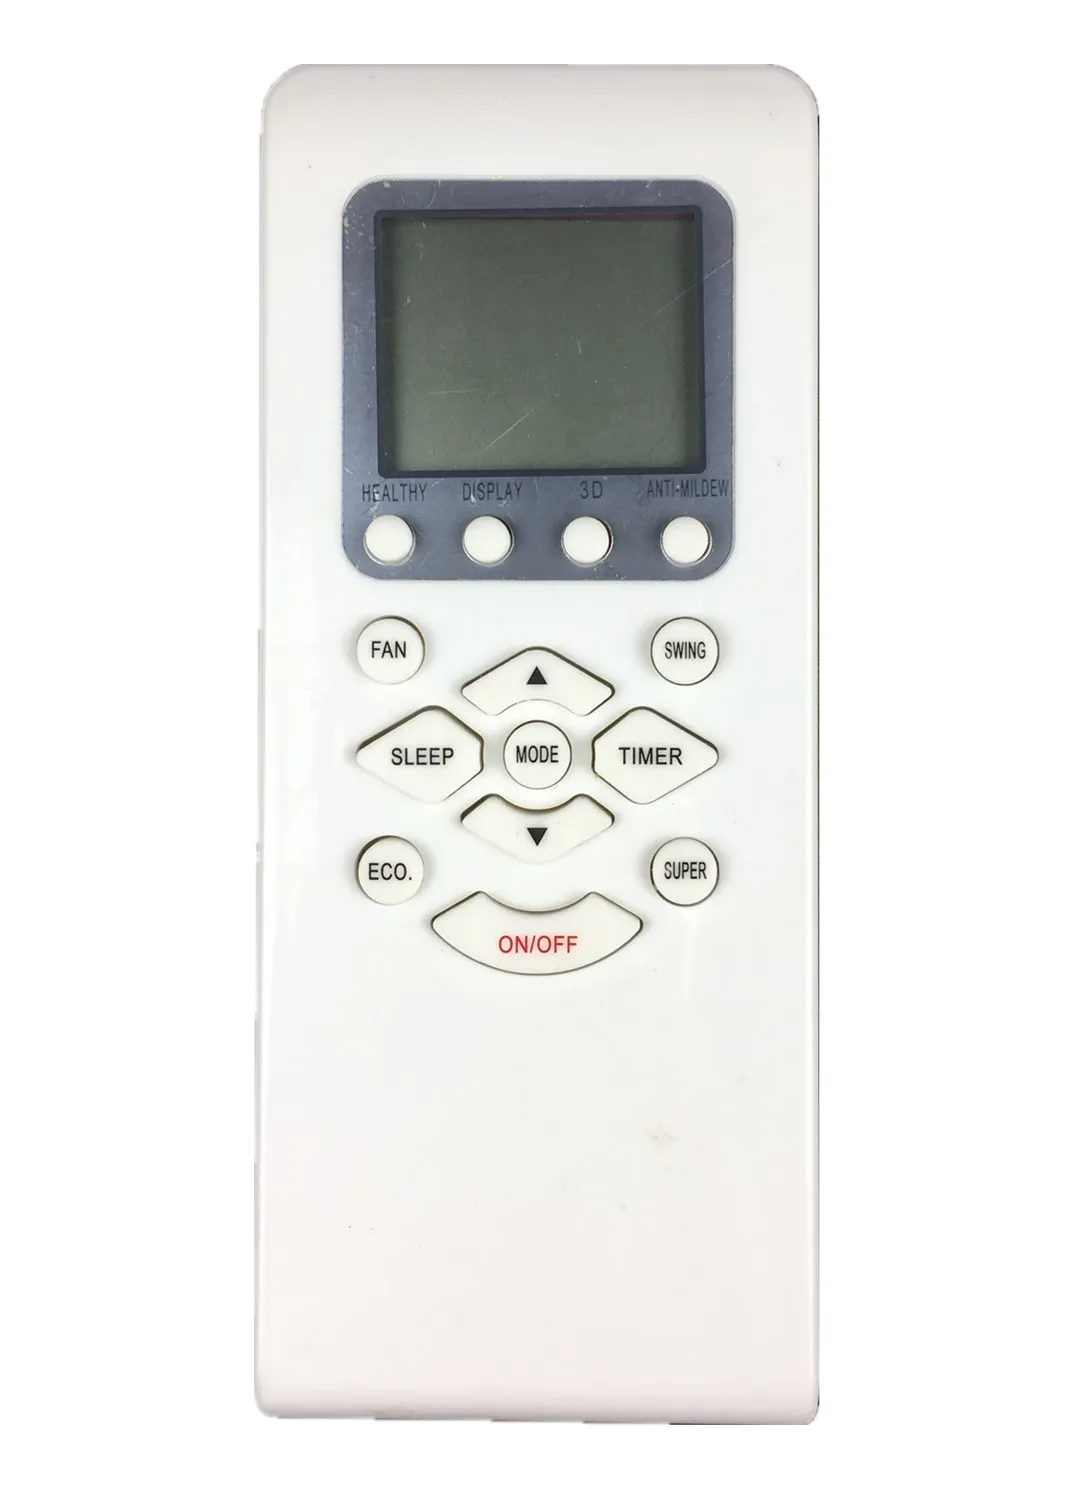 

New Replacement Remote Control For TCL GYKQ-21 KFR-52LW/B2 A/C Air Conditioner